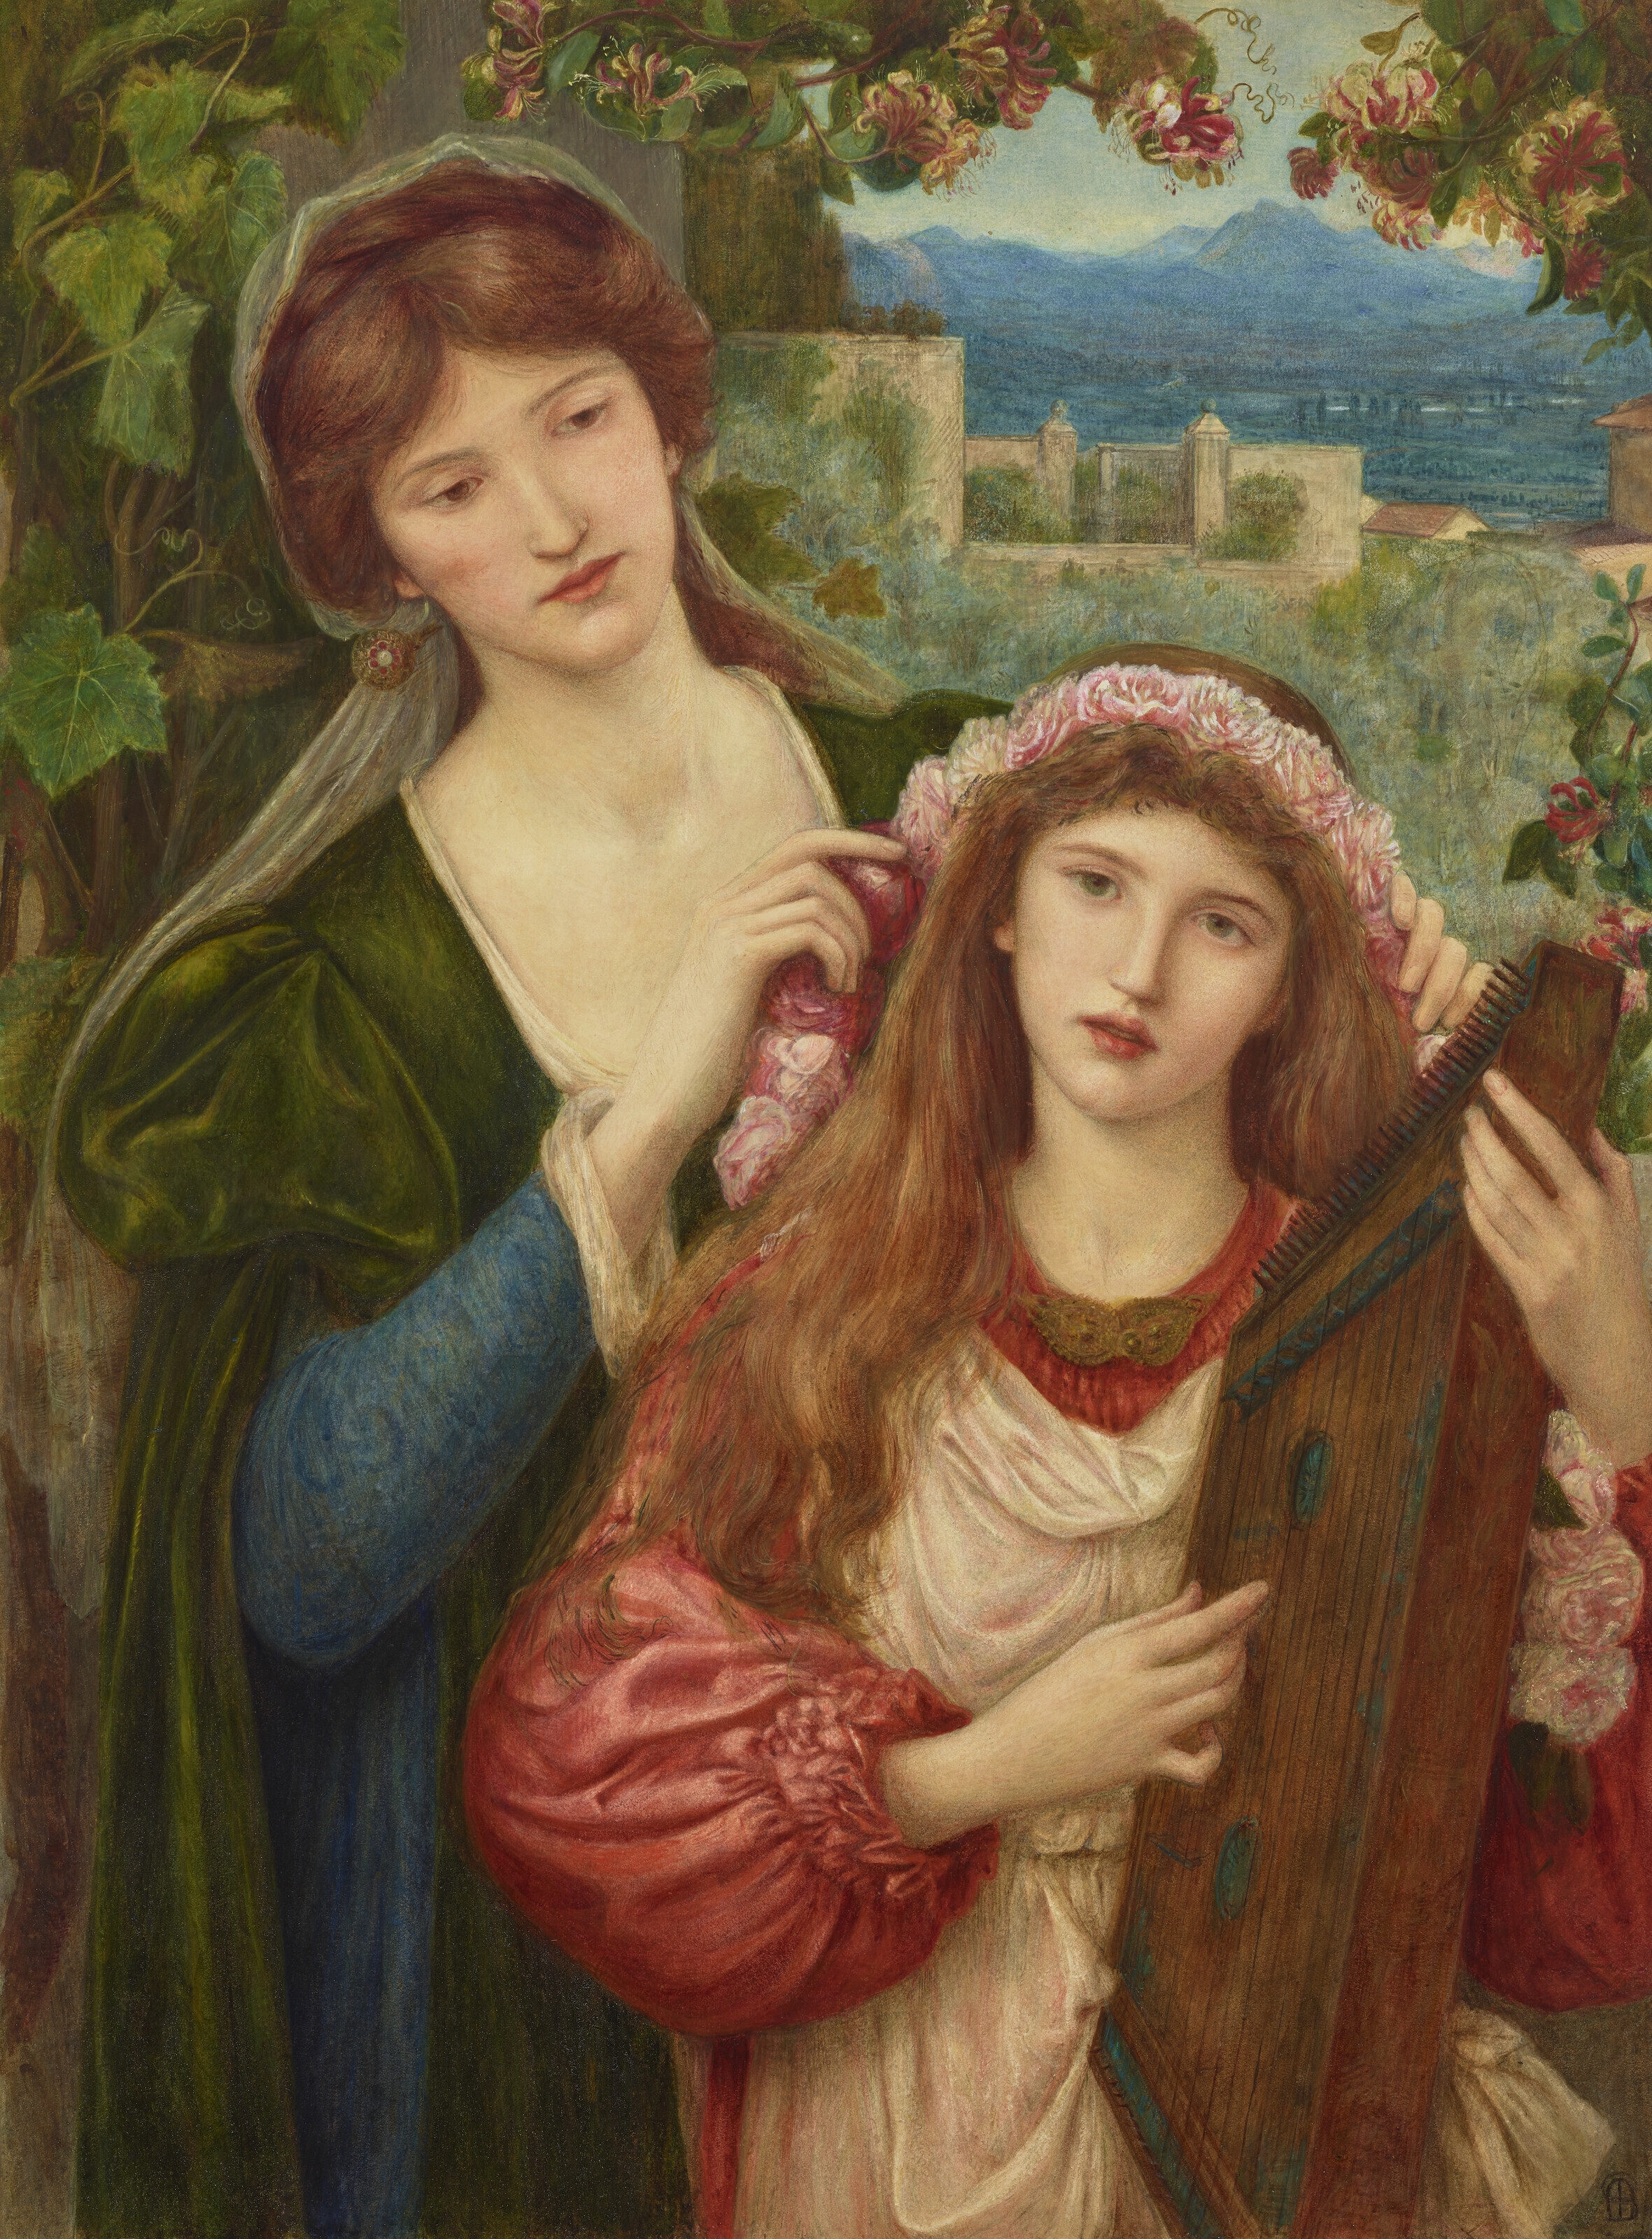 The Childhood of Saint Cecily by Marie Spartali Stillman